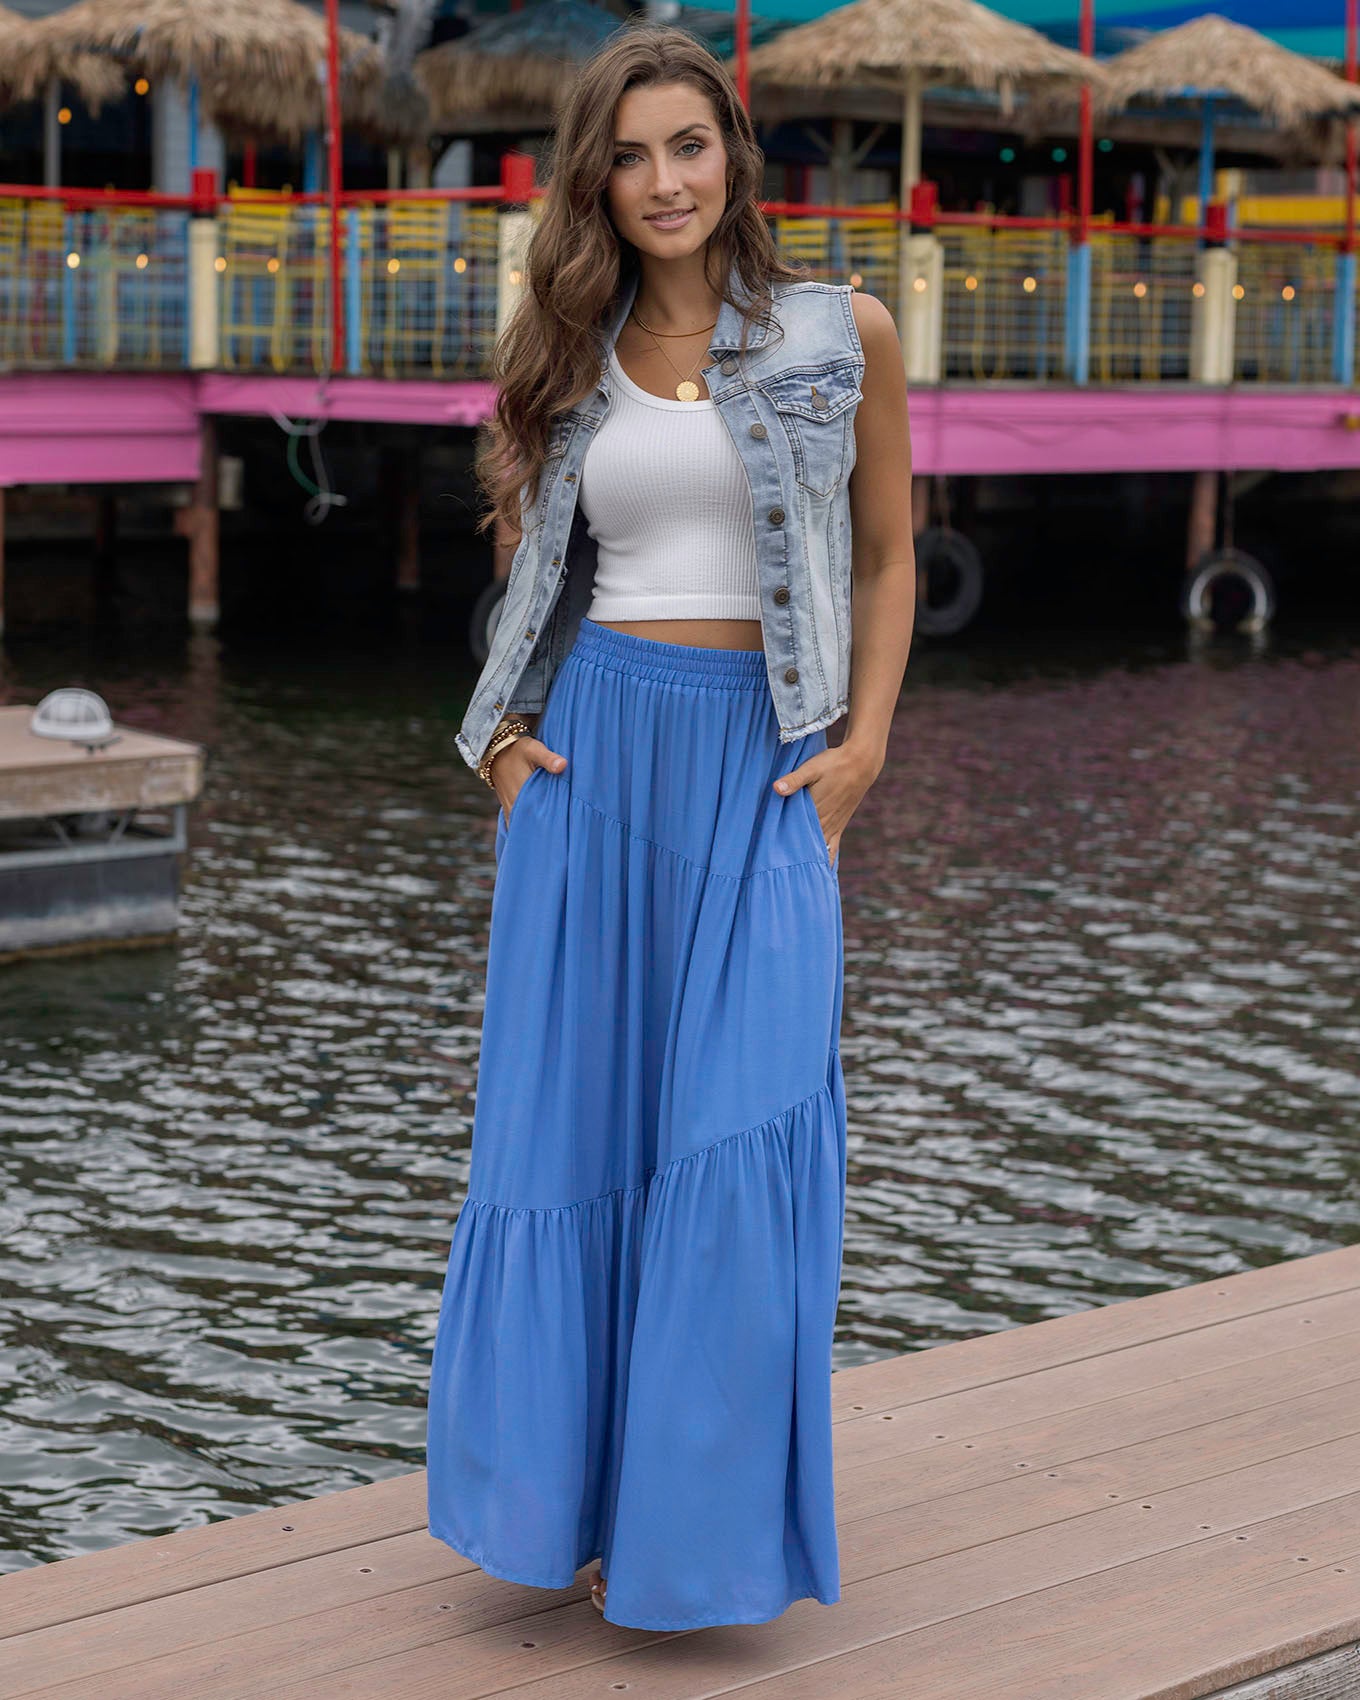 Pocketed Tiered Maxi Skirt in Cornflower Blue